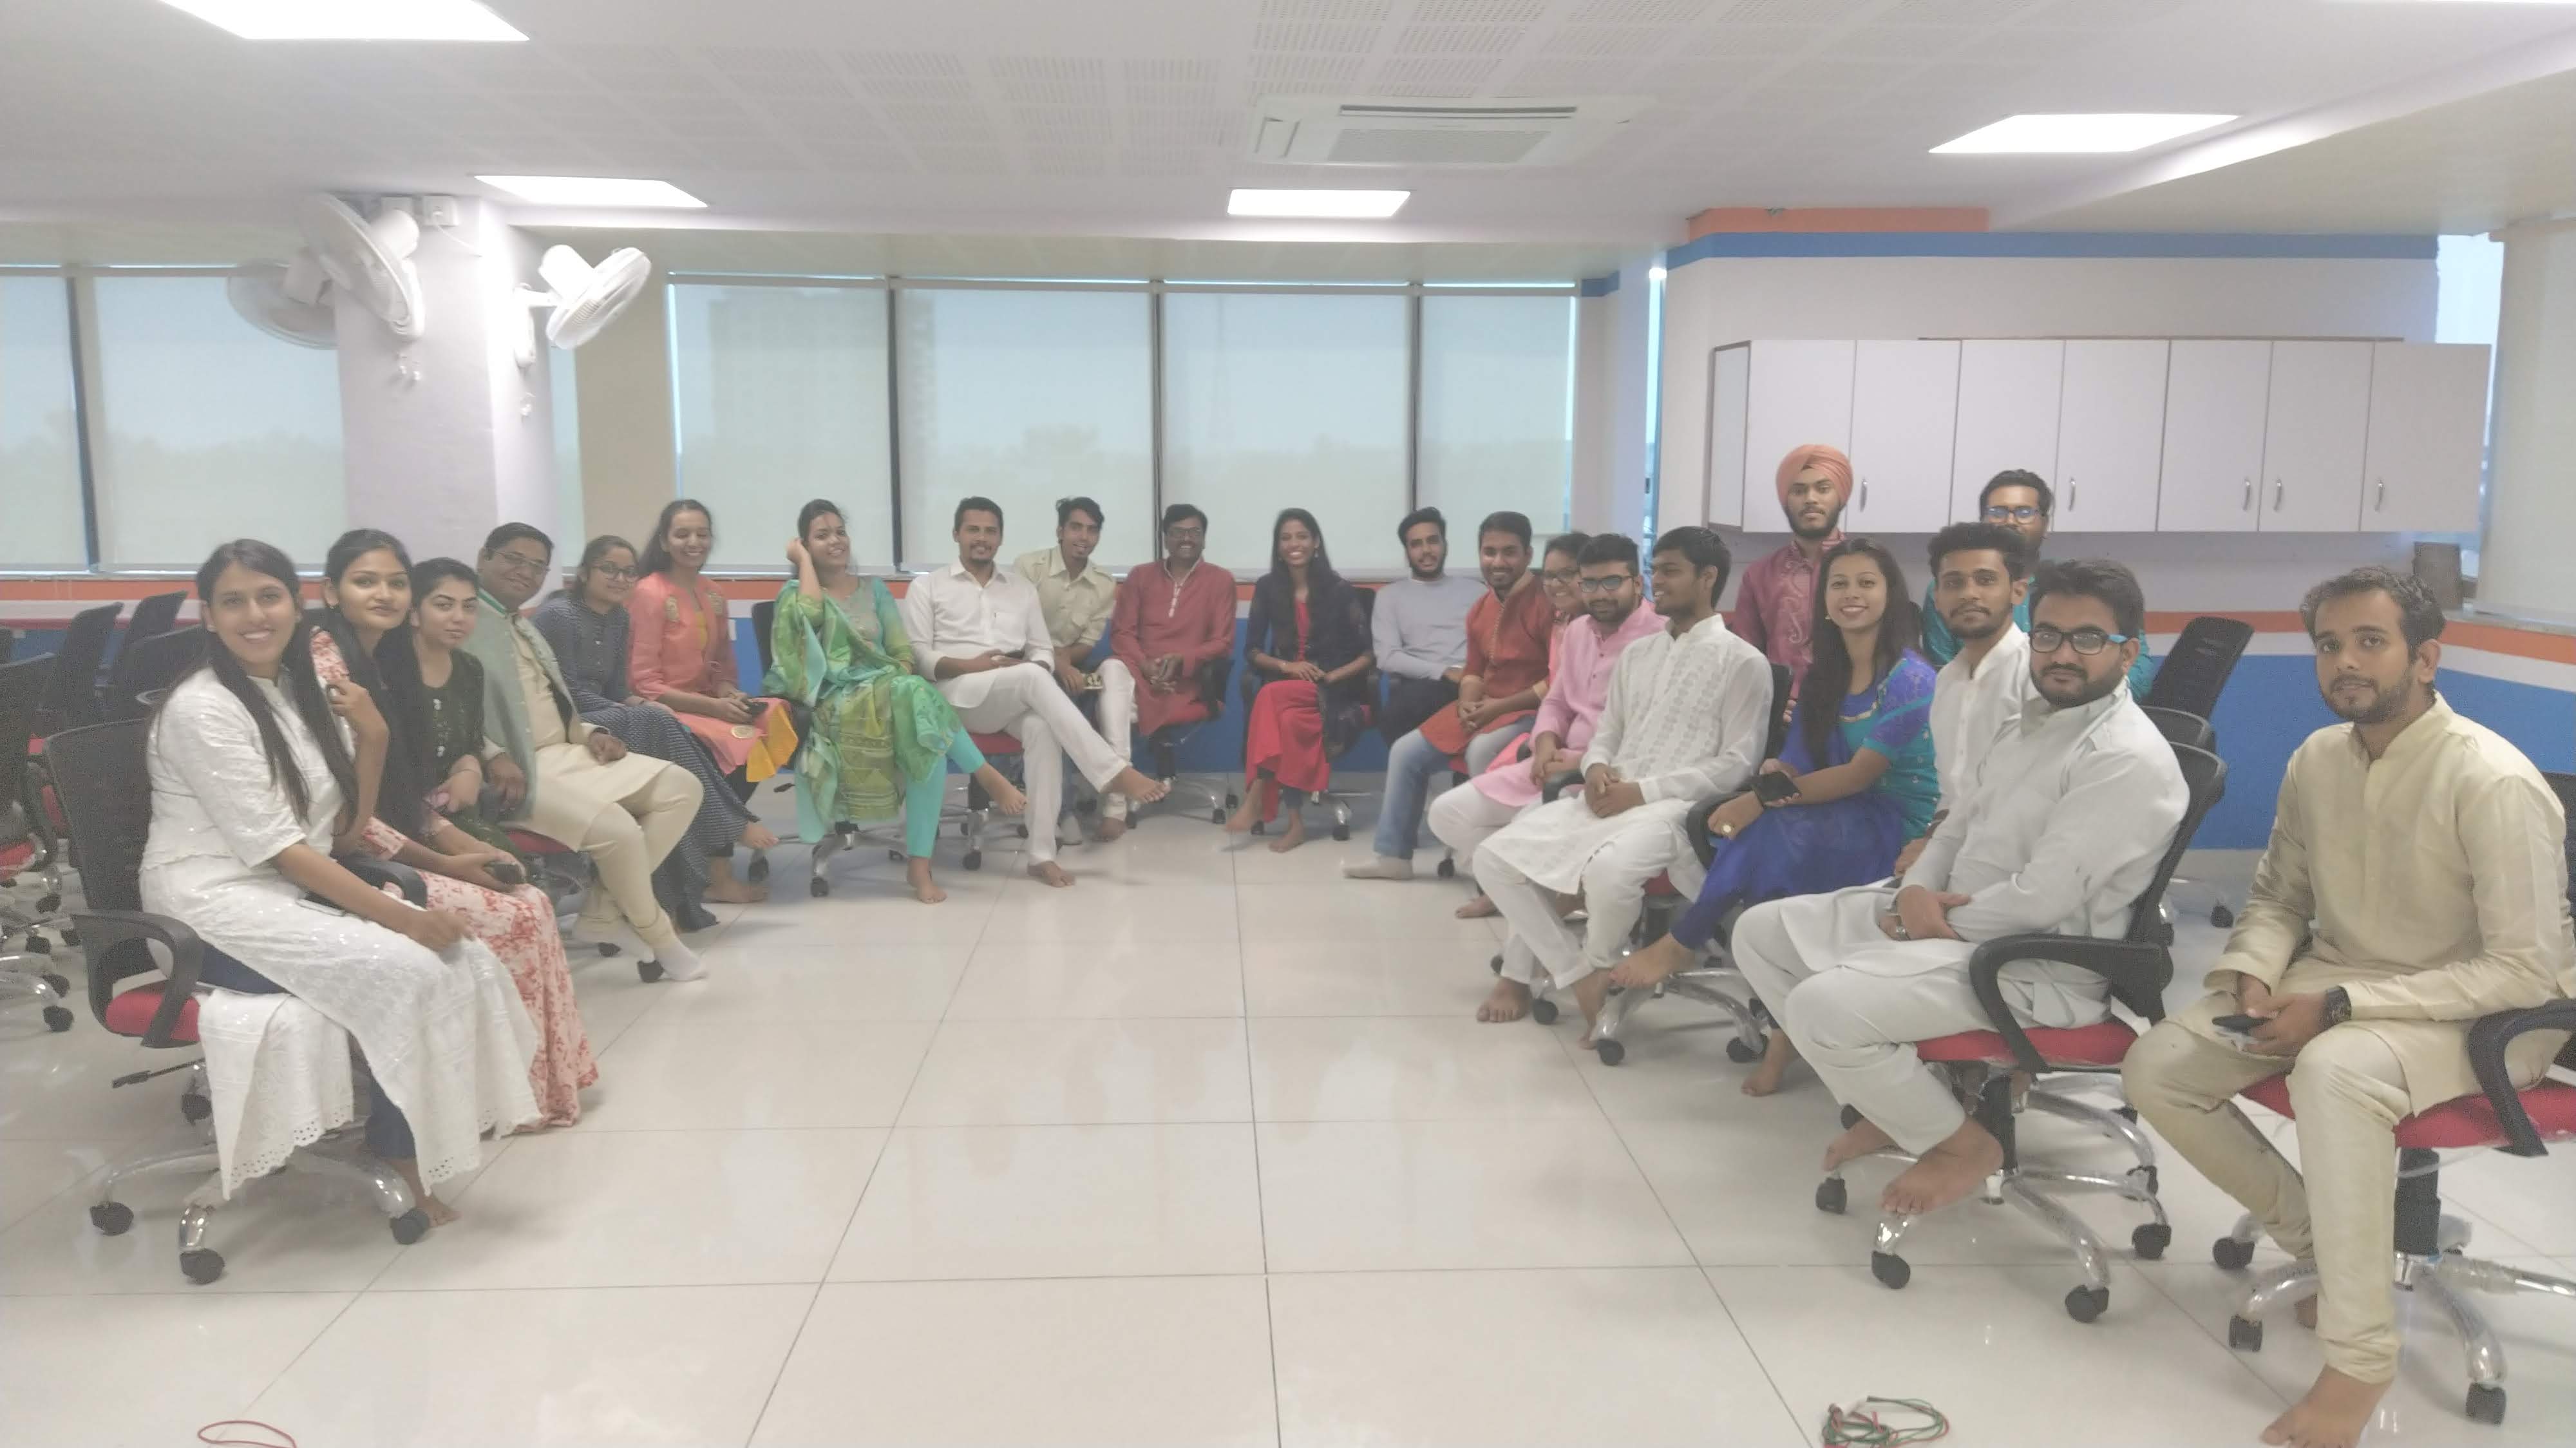 Another glimpse of traditional dresses day in office.